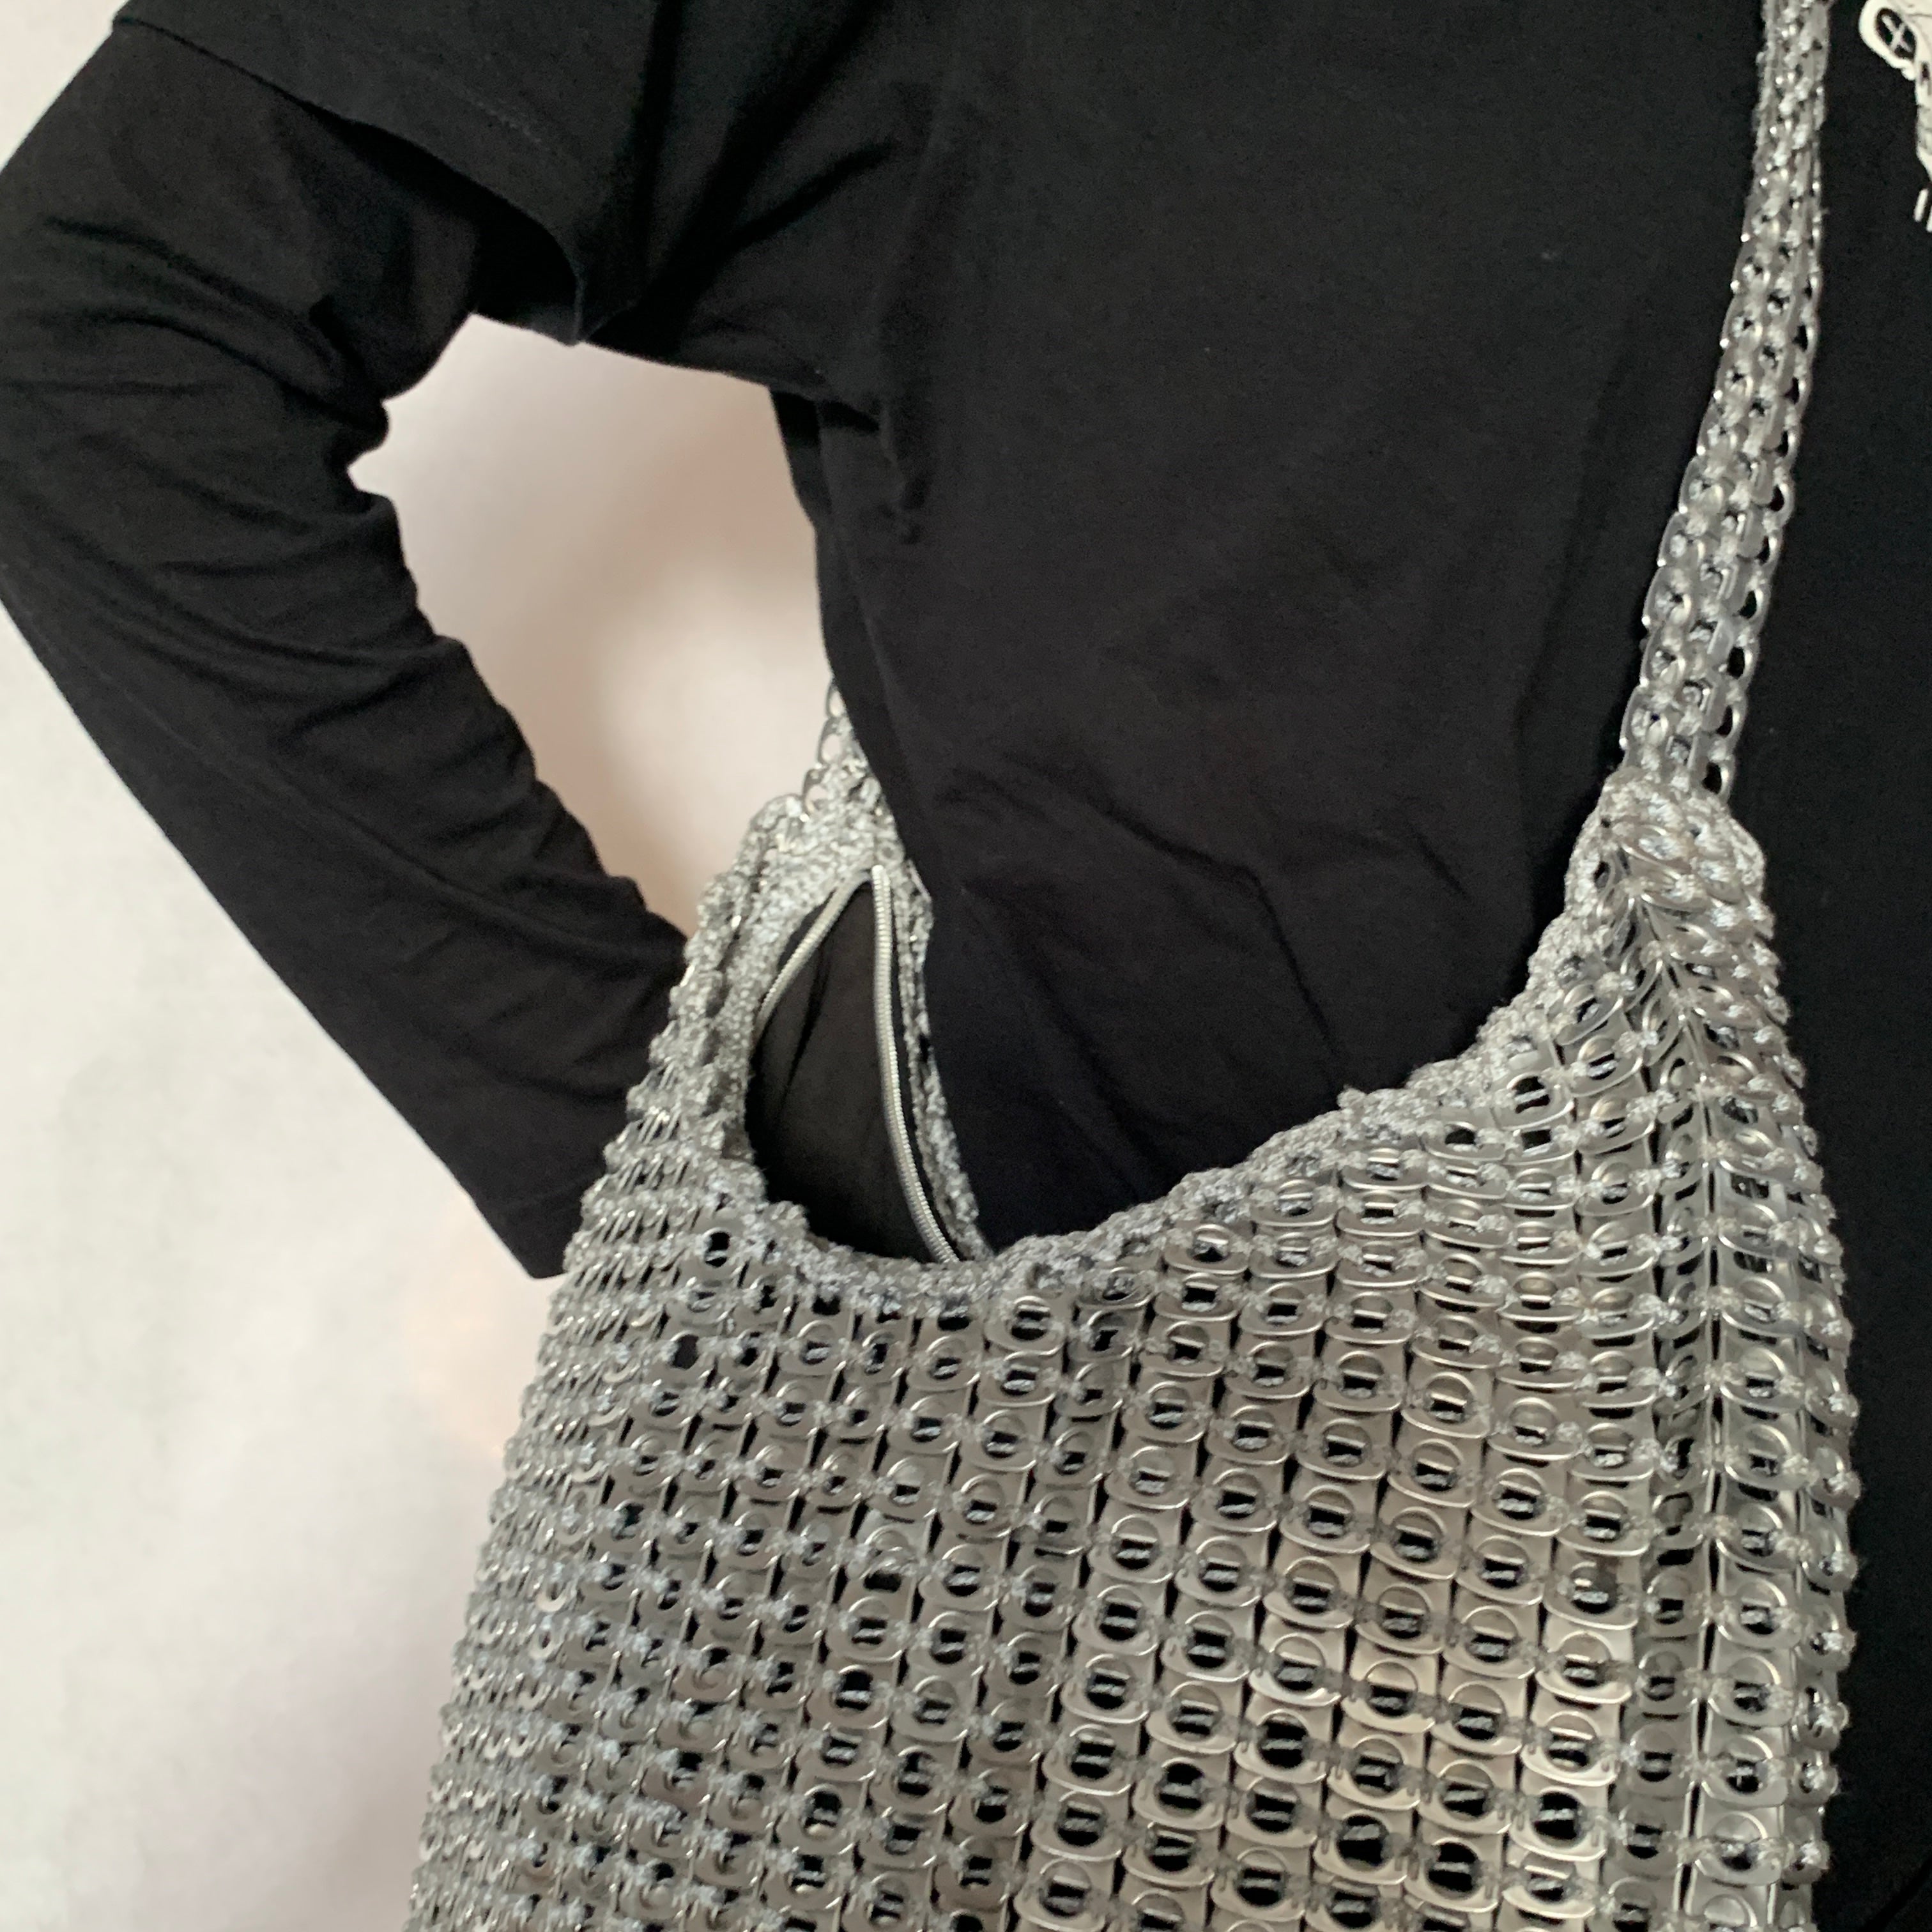 Silver Skye Shoulder Bag by Soda Pop - Handmade with Metallic Upcycled Ring-Pulls